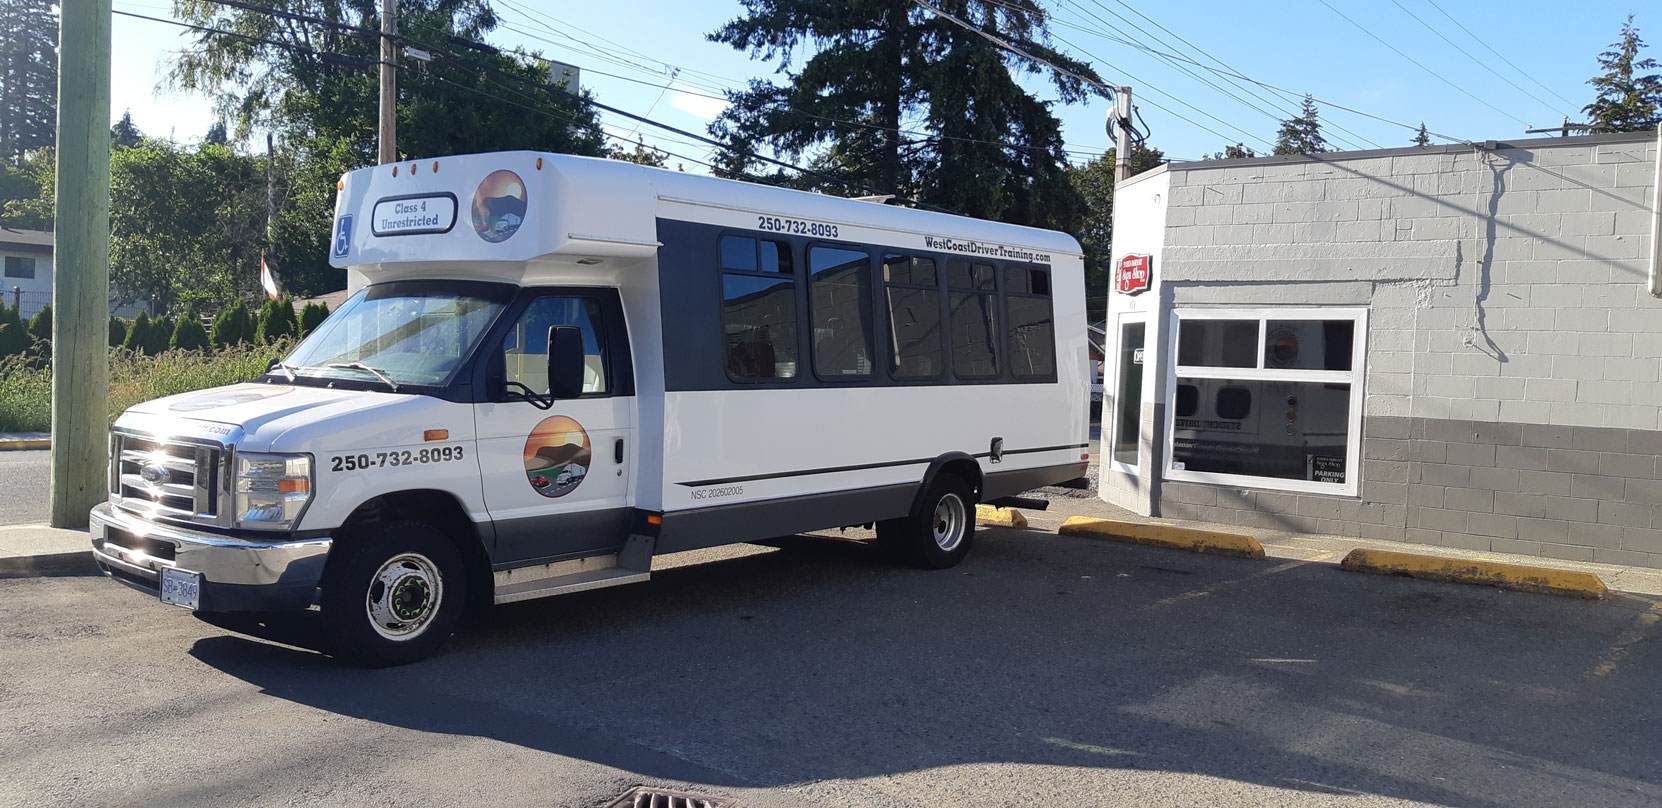 Our Ford E450 20 seat bus at Mark's Instant Sign Shop awaiting application of its final signage [Photo: West Coast Driver Training]